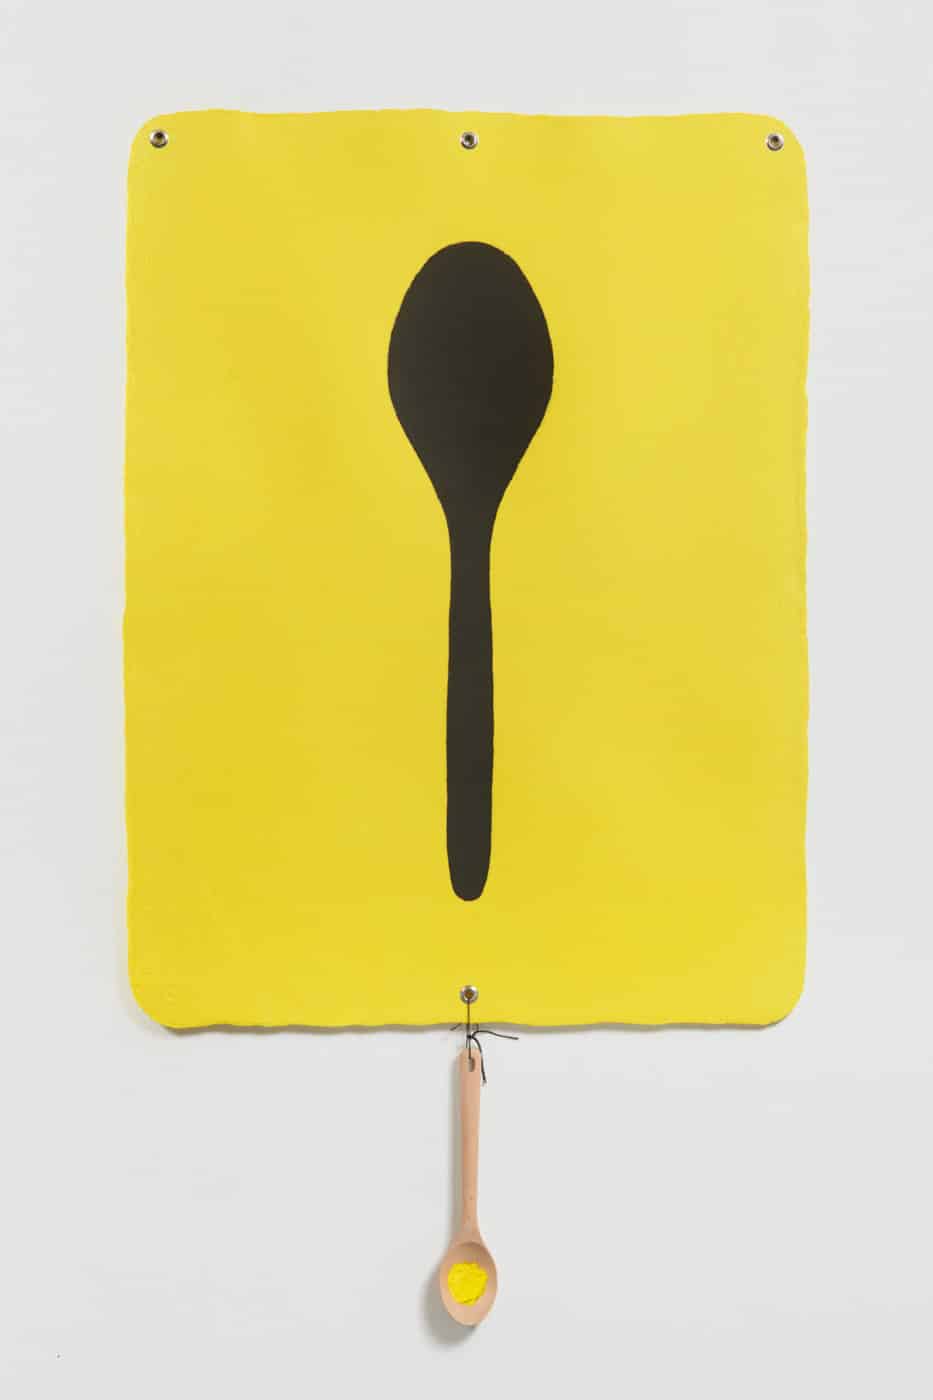 Artwork of a yellow painting with a silhouette of a spoon with a wooden spoon hanging from the painting by B. Wurtz (CalArts ’80)